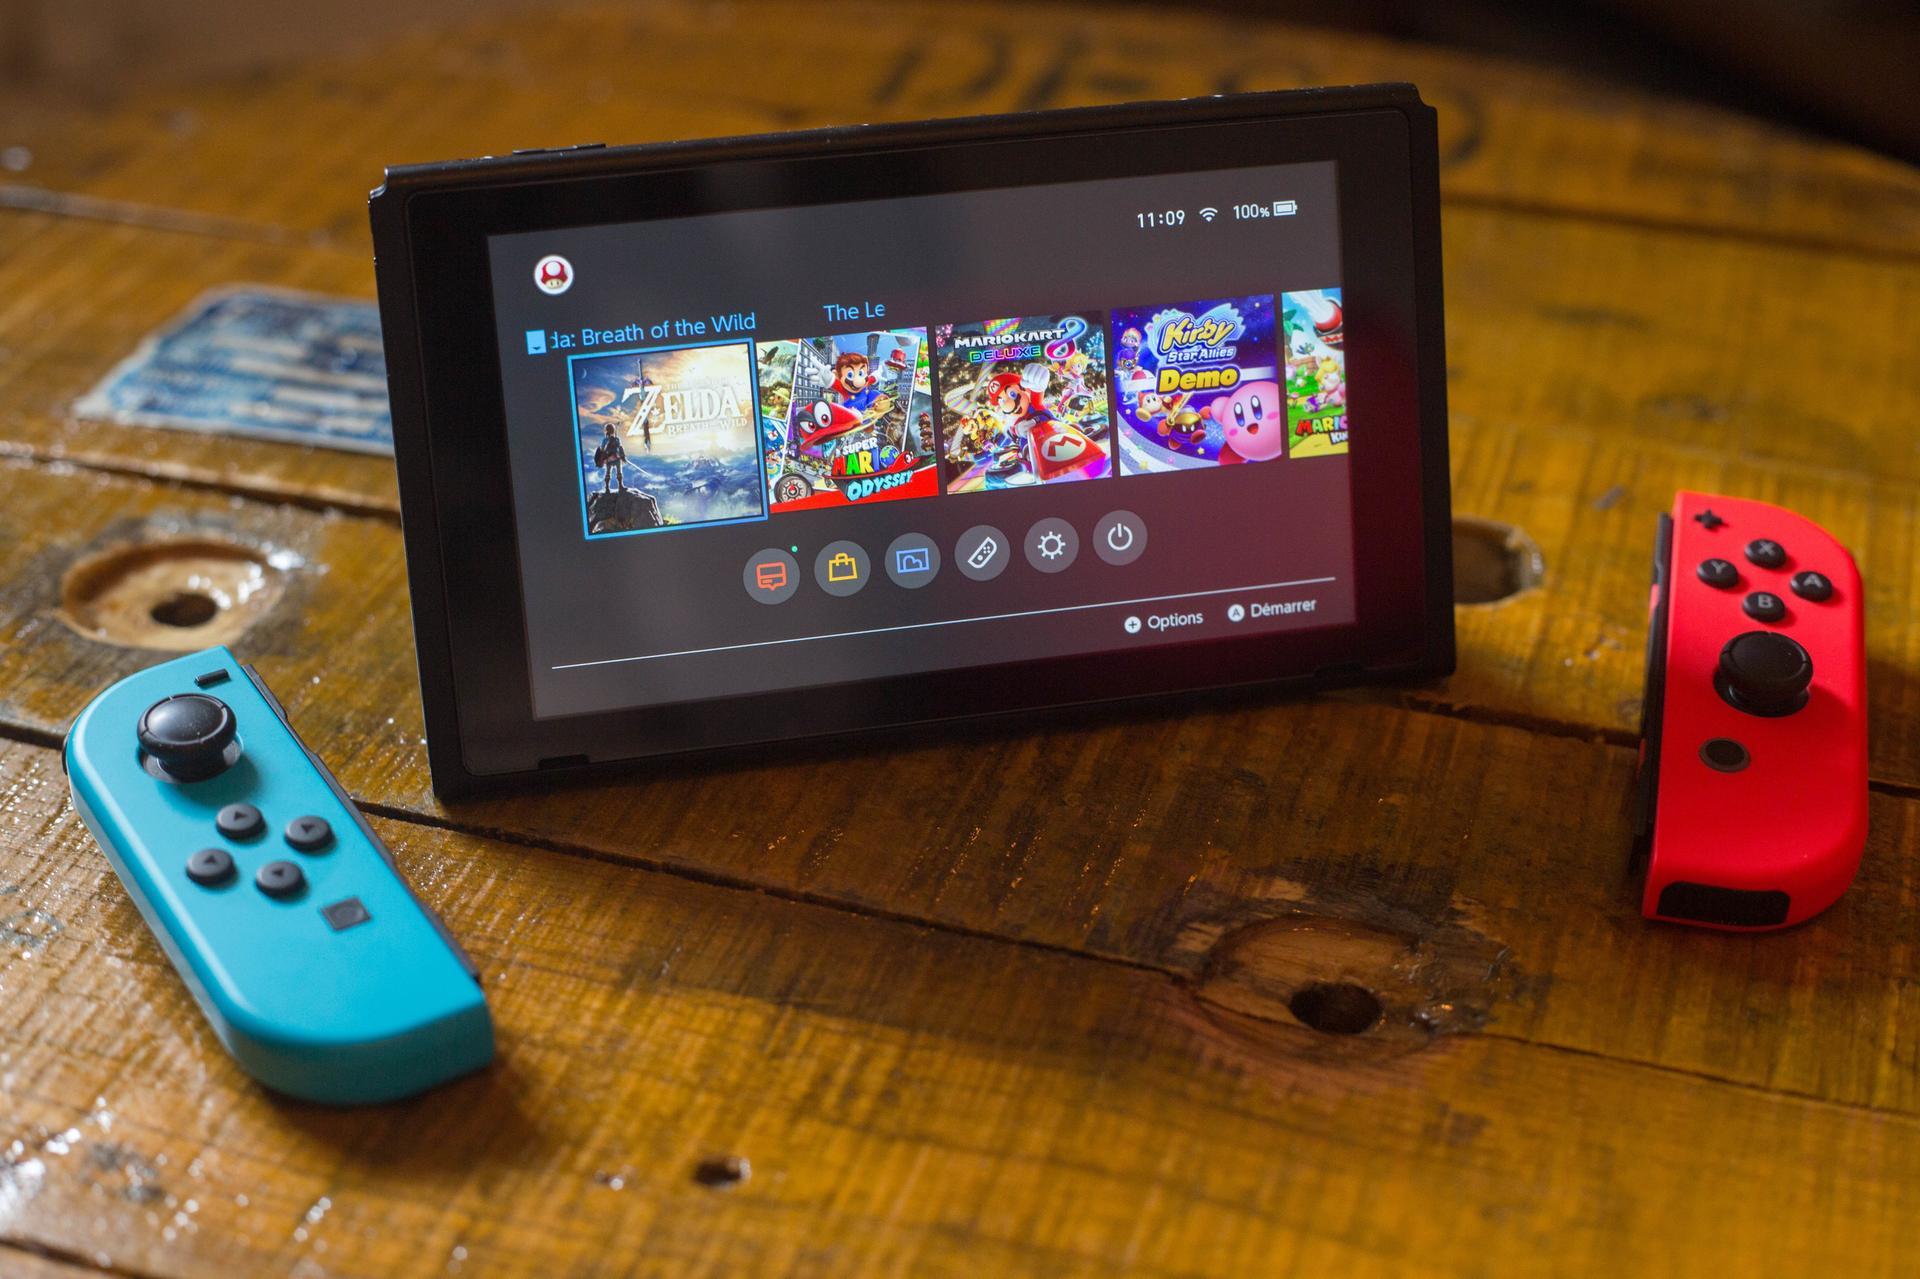 Nintendo reportedly plans to release upgraded Switch console in 2021